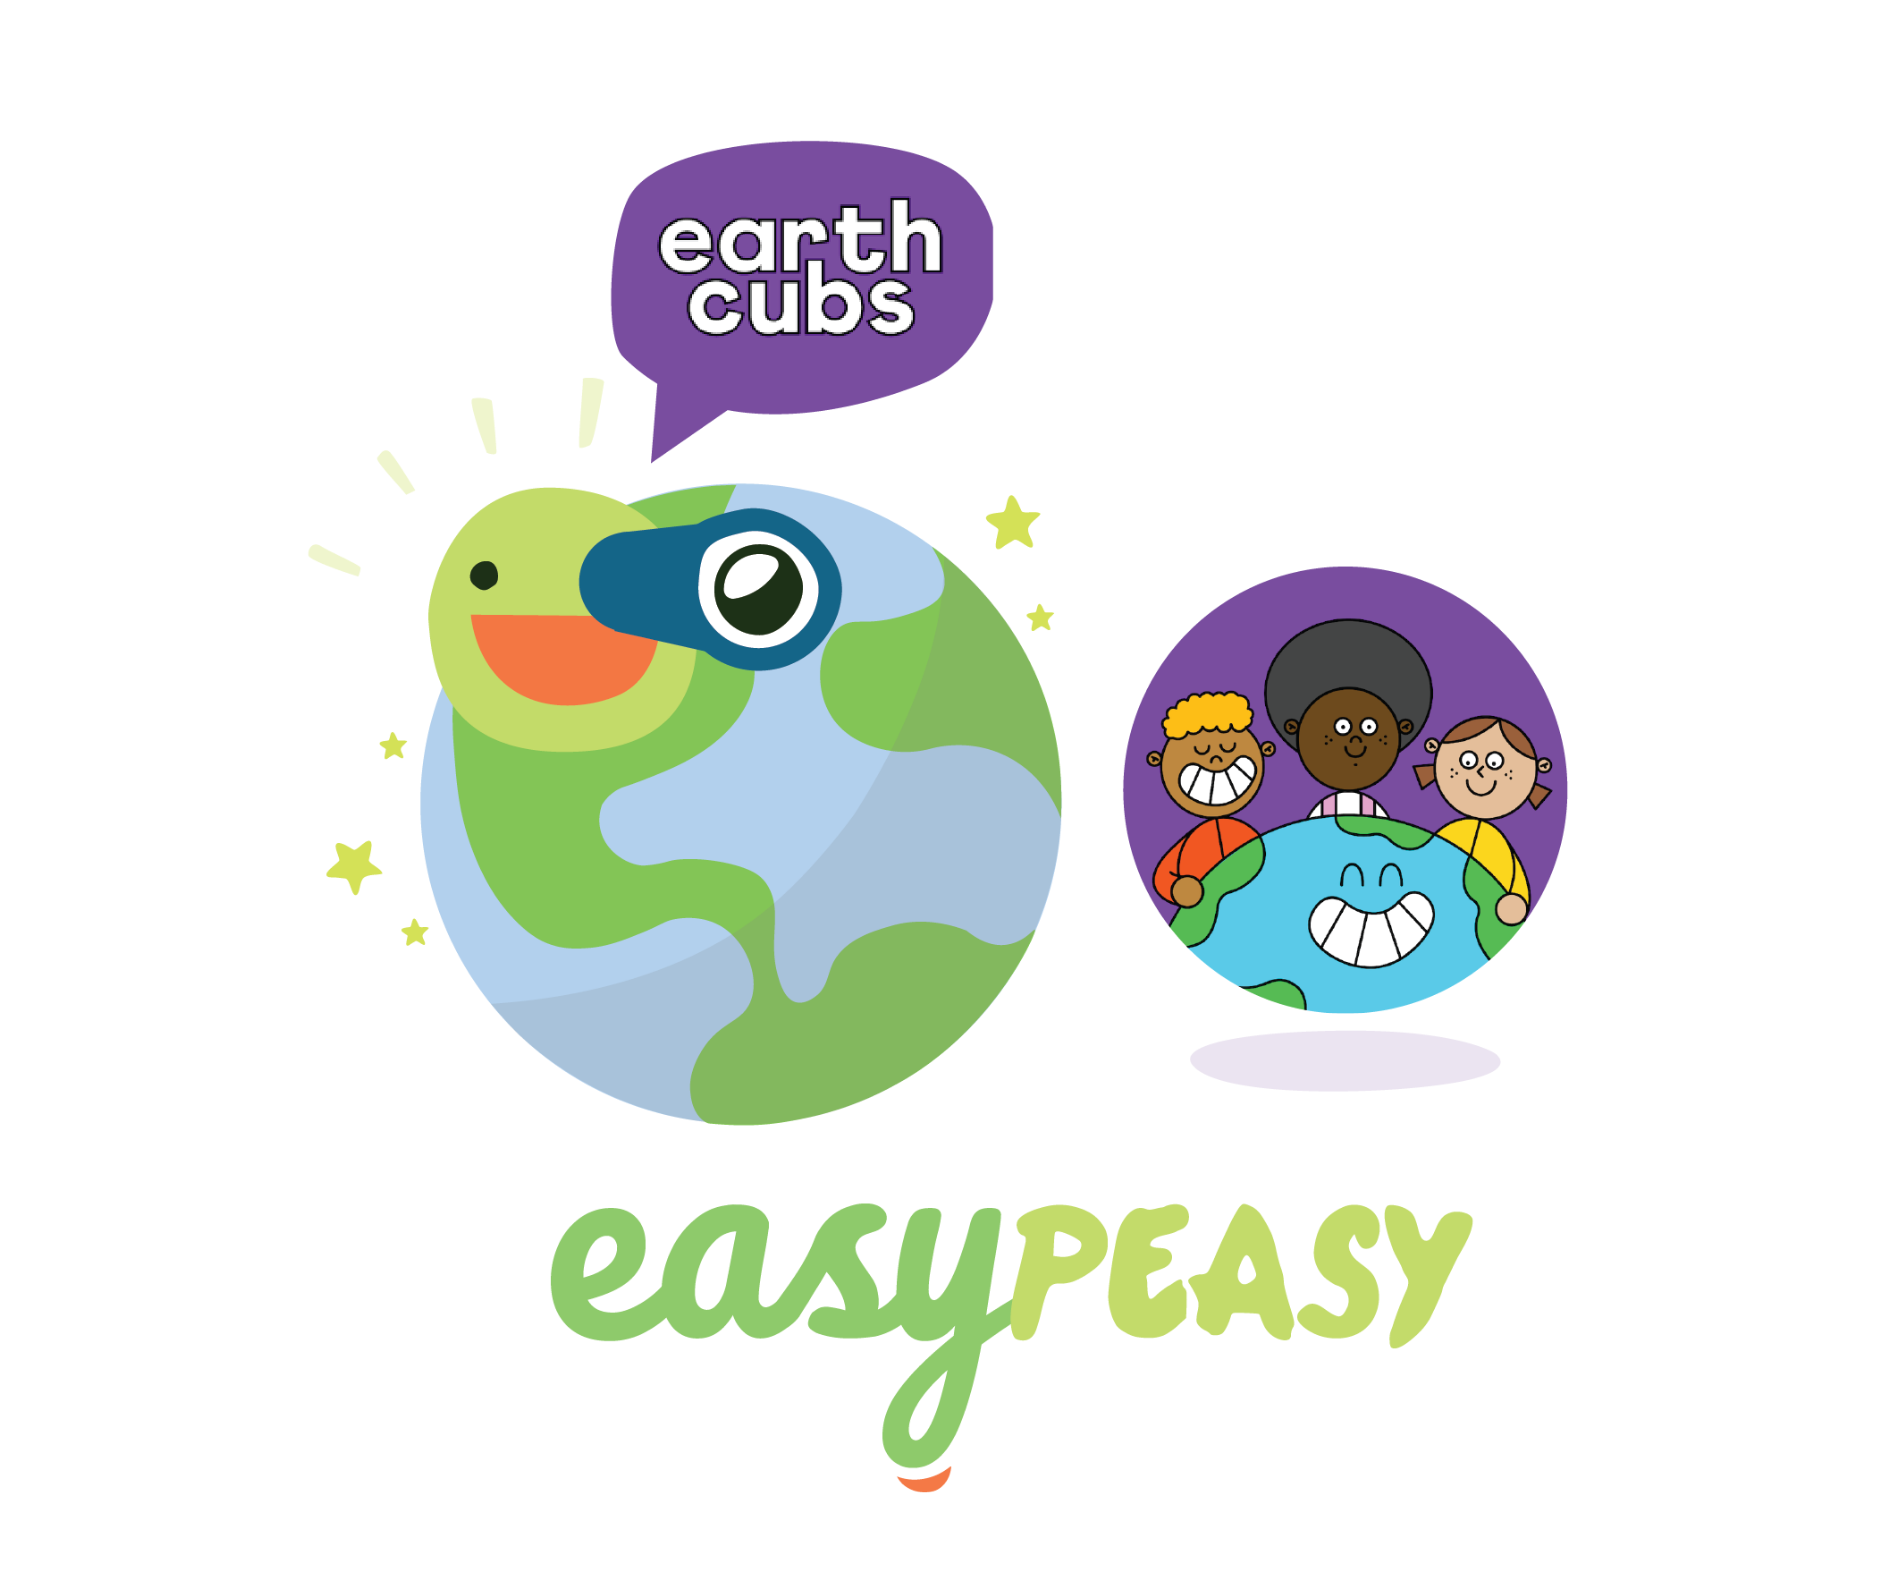 EasyPeasy pea and children worldwide hoovering over earth looking at Earth Cubs